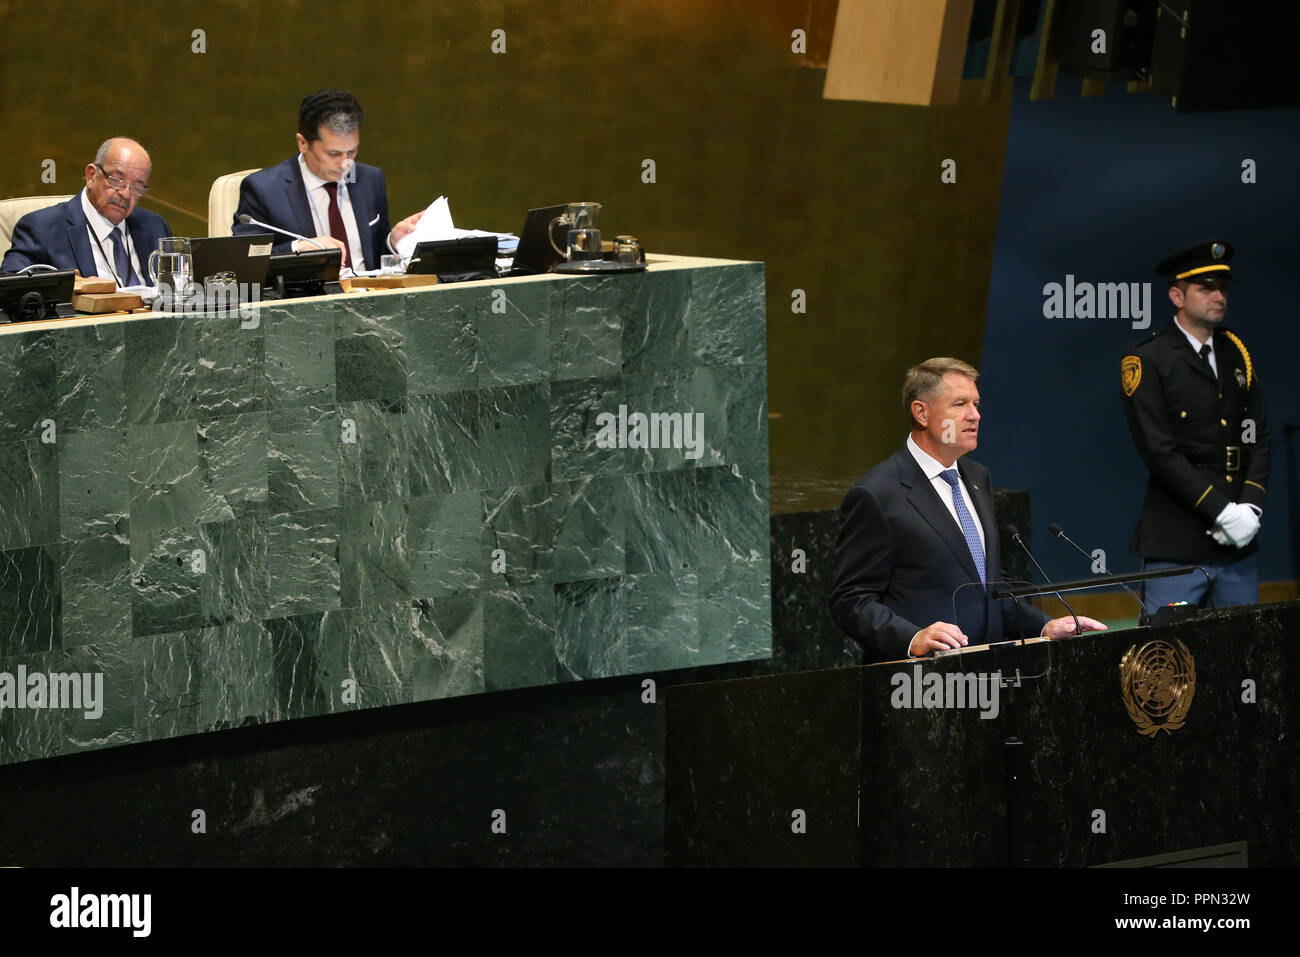 United Nations, New York, USA. 26th Sep, 2018. Romanian President Klaus Iohannis addresses the General Debate of the 73rd session of the United Nations General Assembly at the UN headquarters in New York, on Sept. 26, 2018. Credit: Qin Lang/Xinhua/Alamy Live News Stock Photo